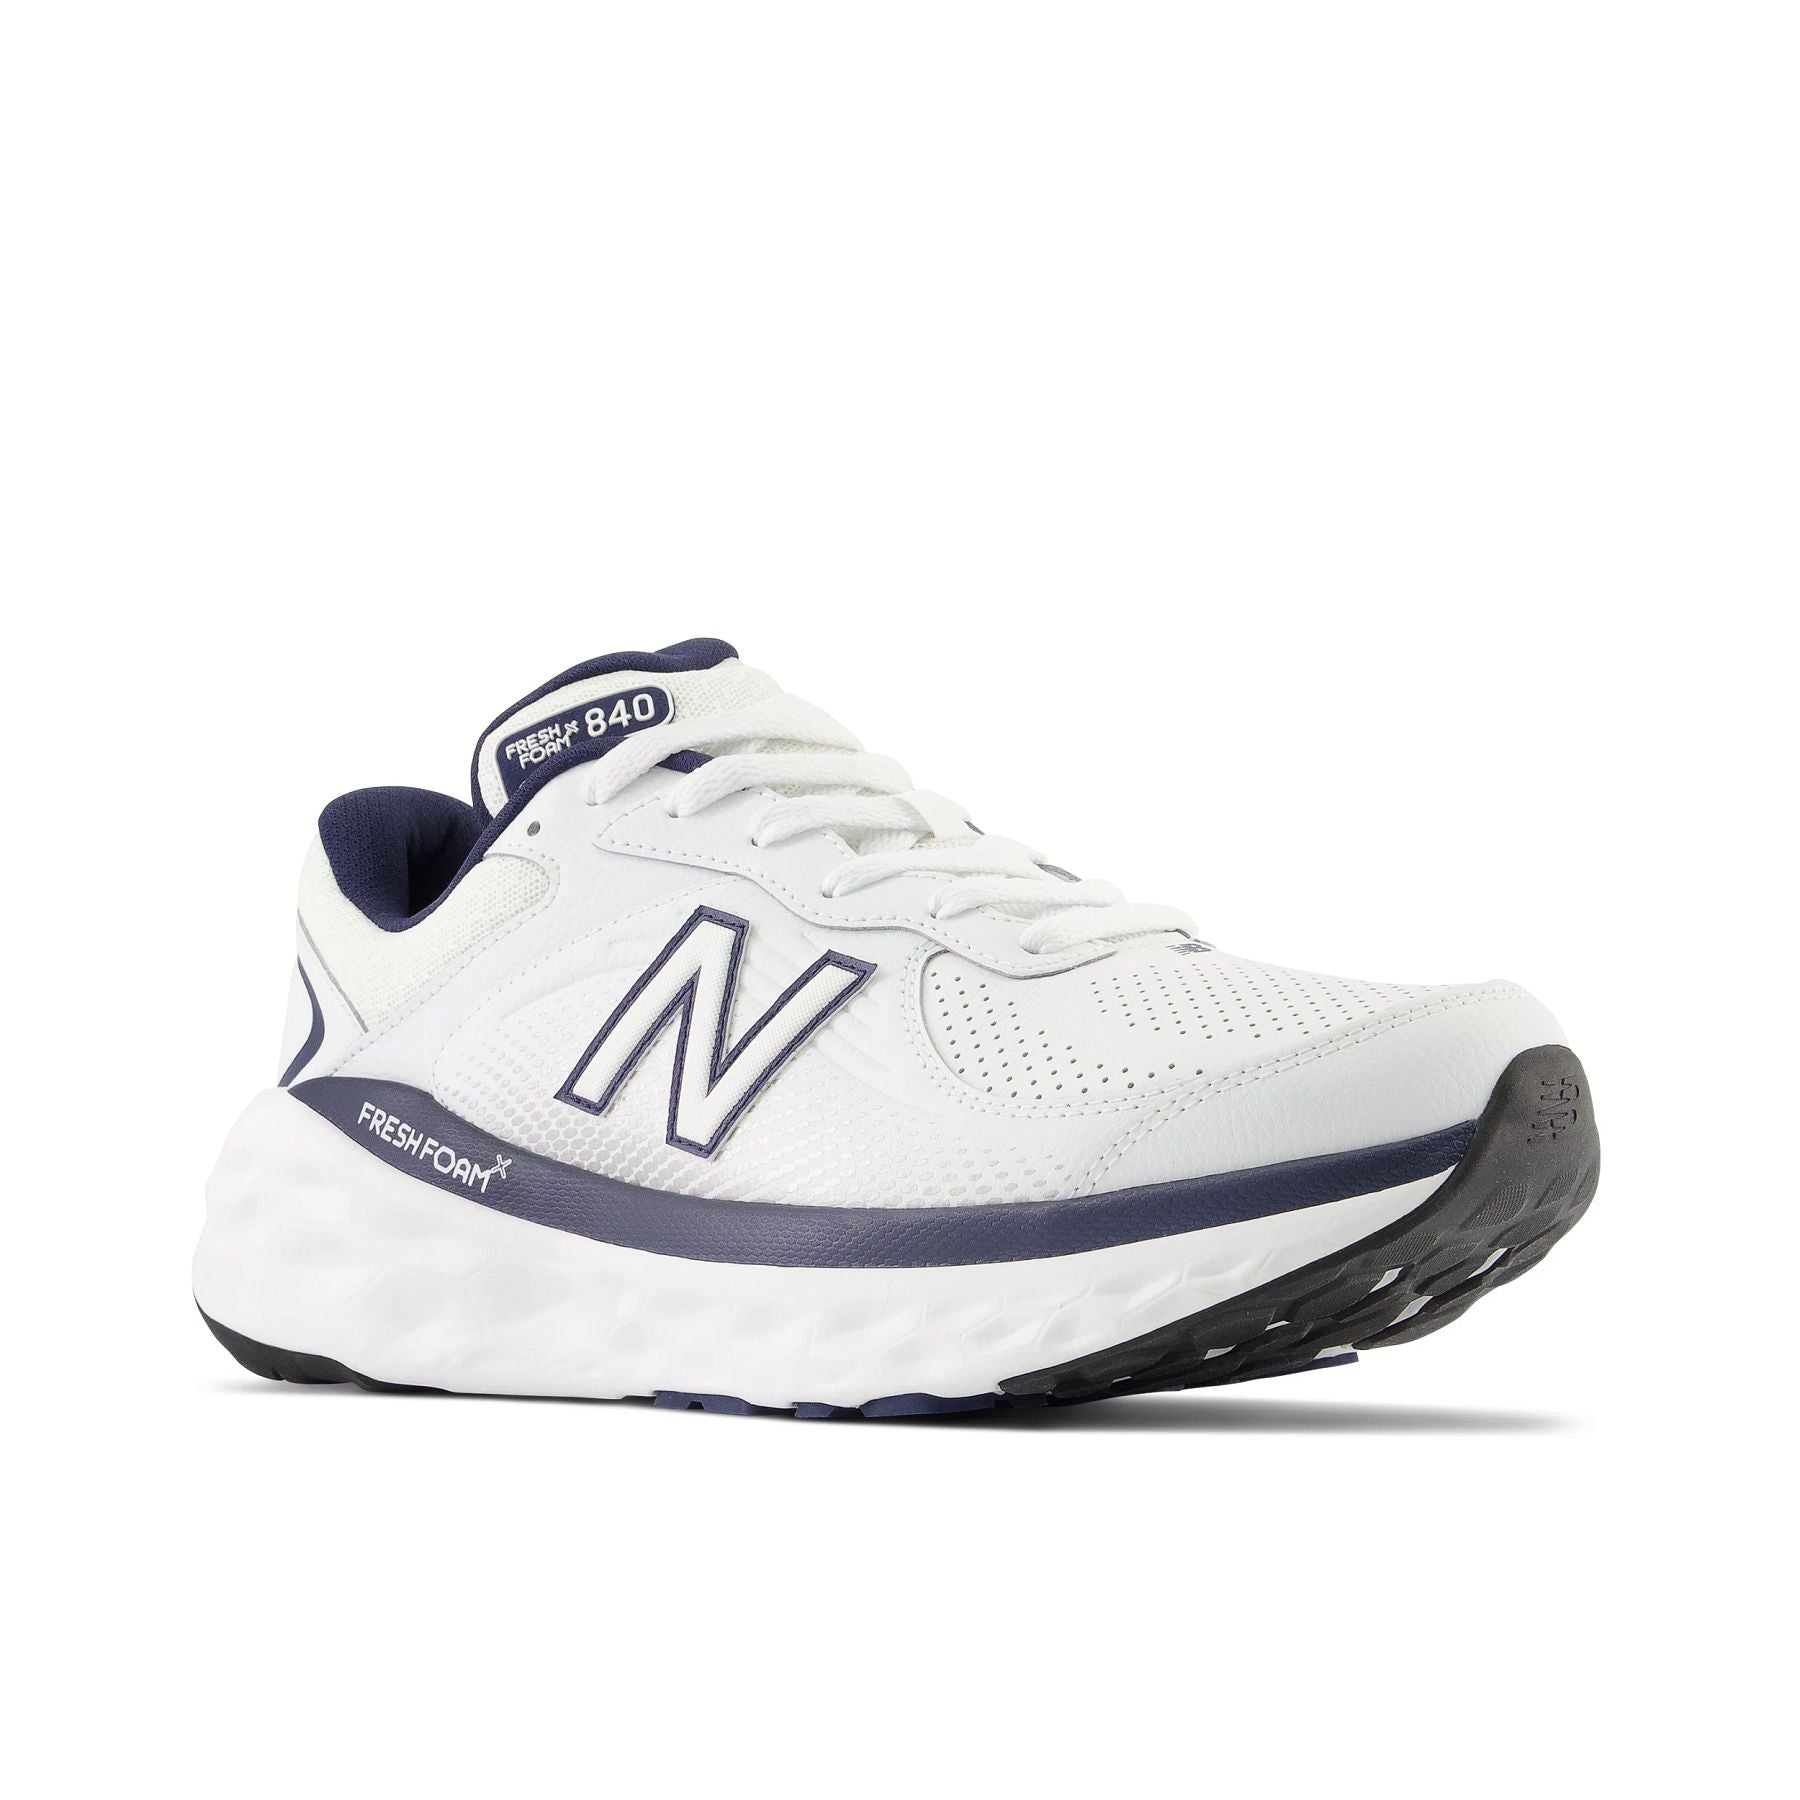 Front angle view of the Men's Leather New Balance MW840 V1 in White/Navy